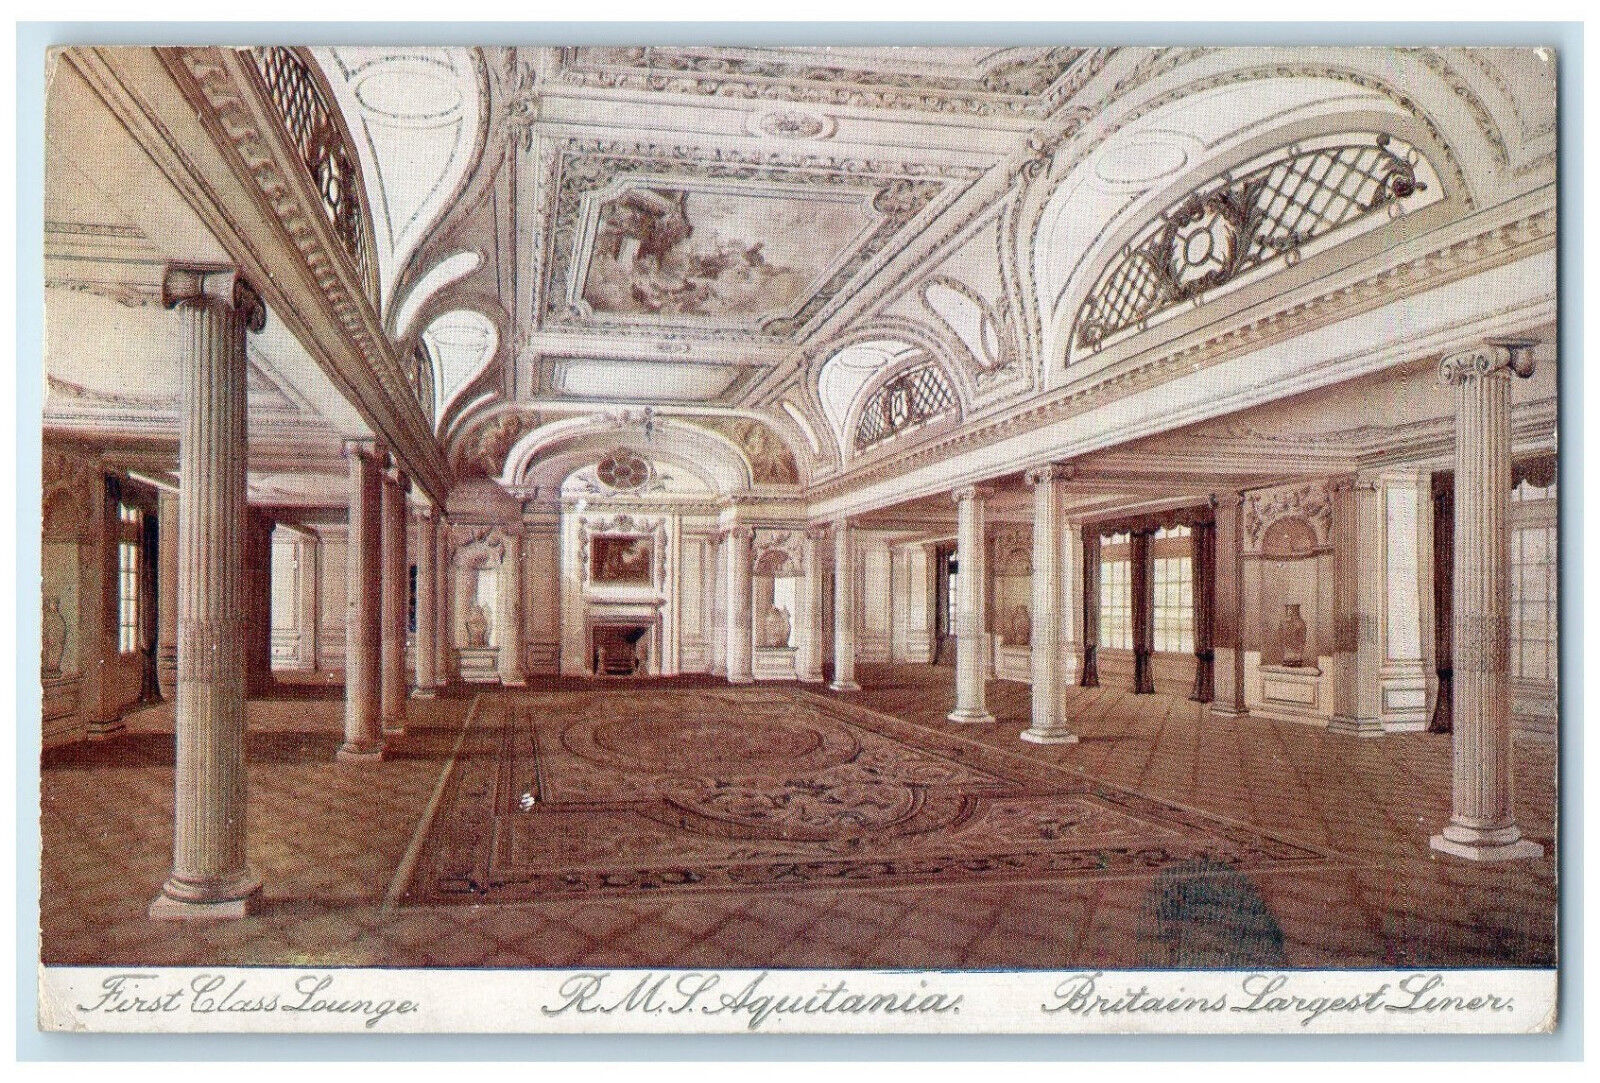 c1910 First Class Lounge RMS Aquitania Britains Largest Liner Unposted Postcard